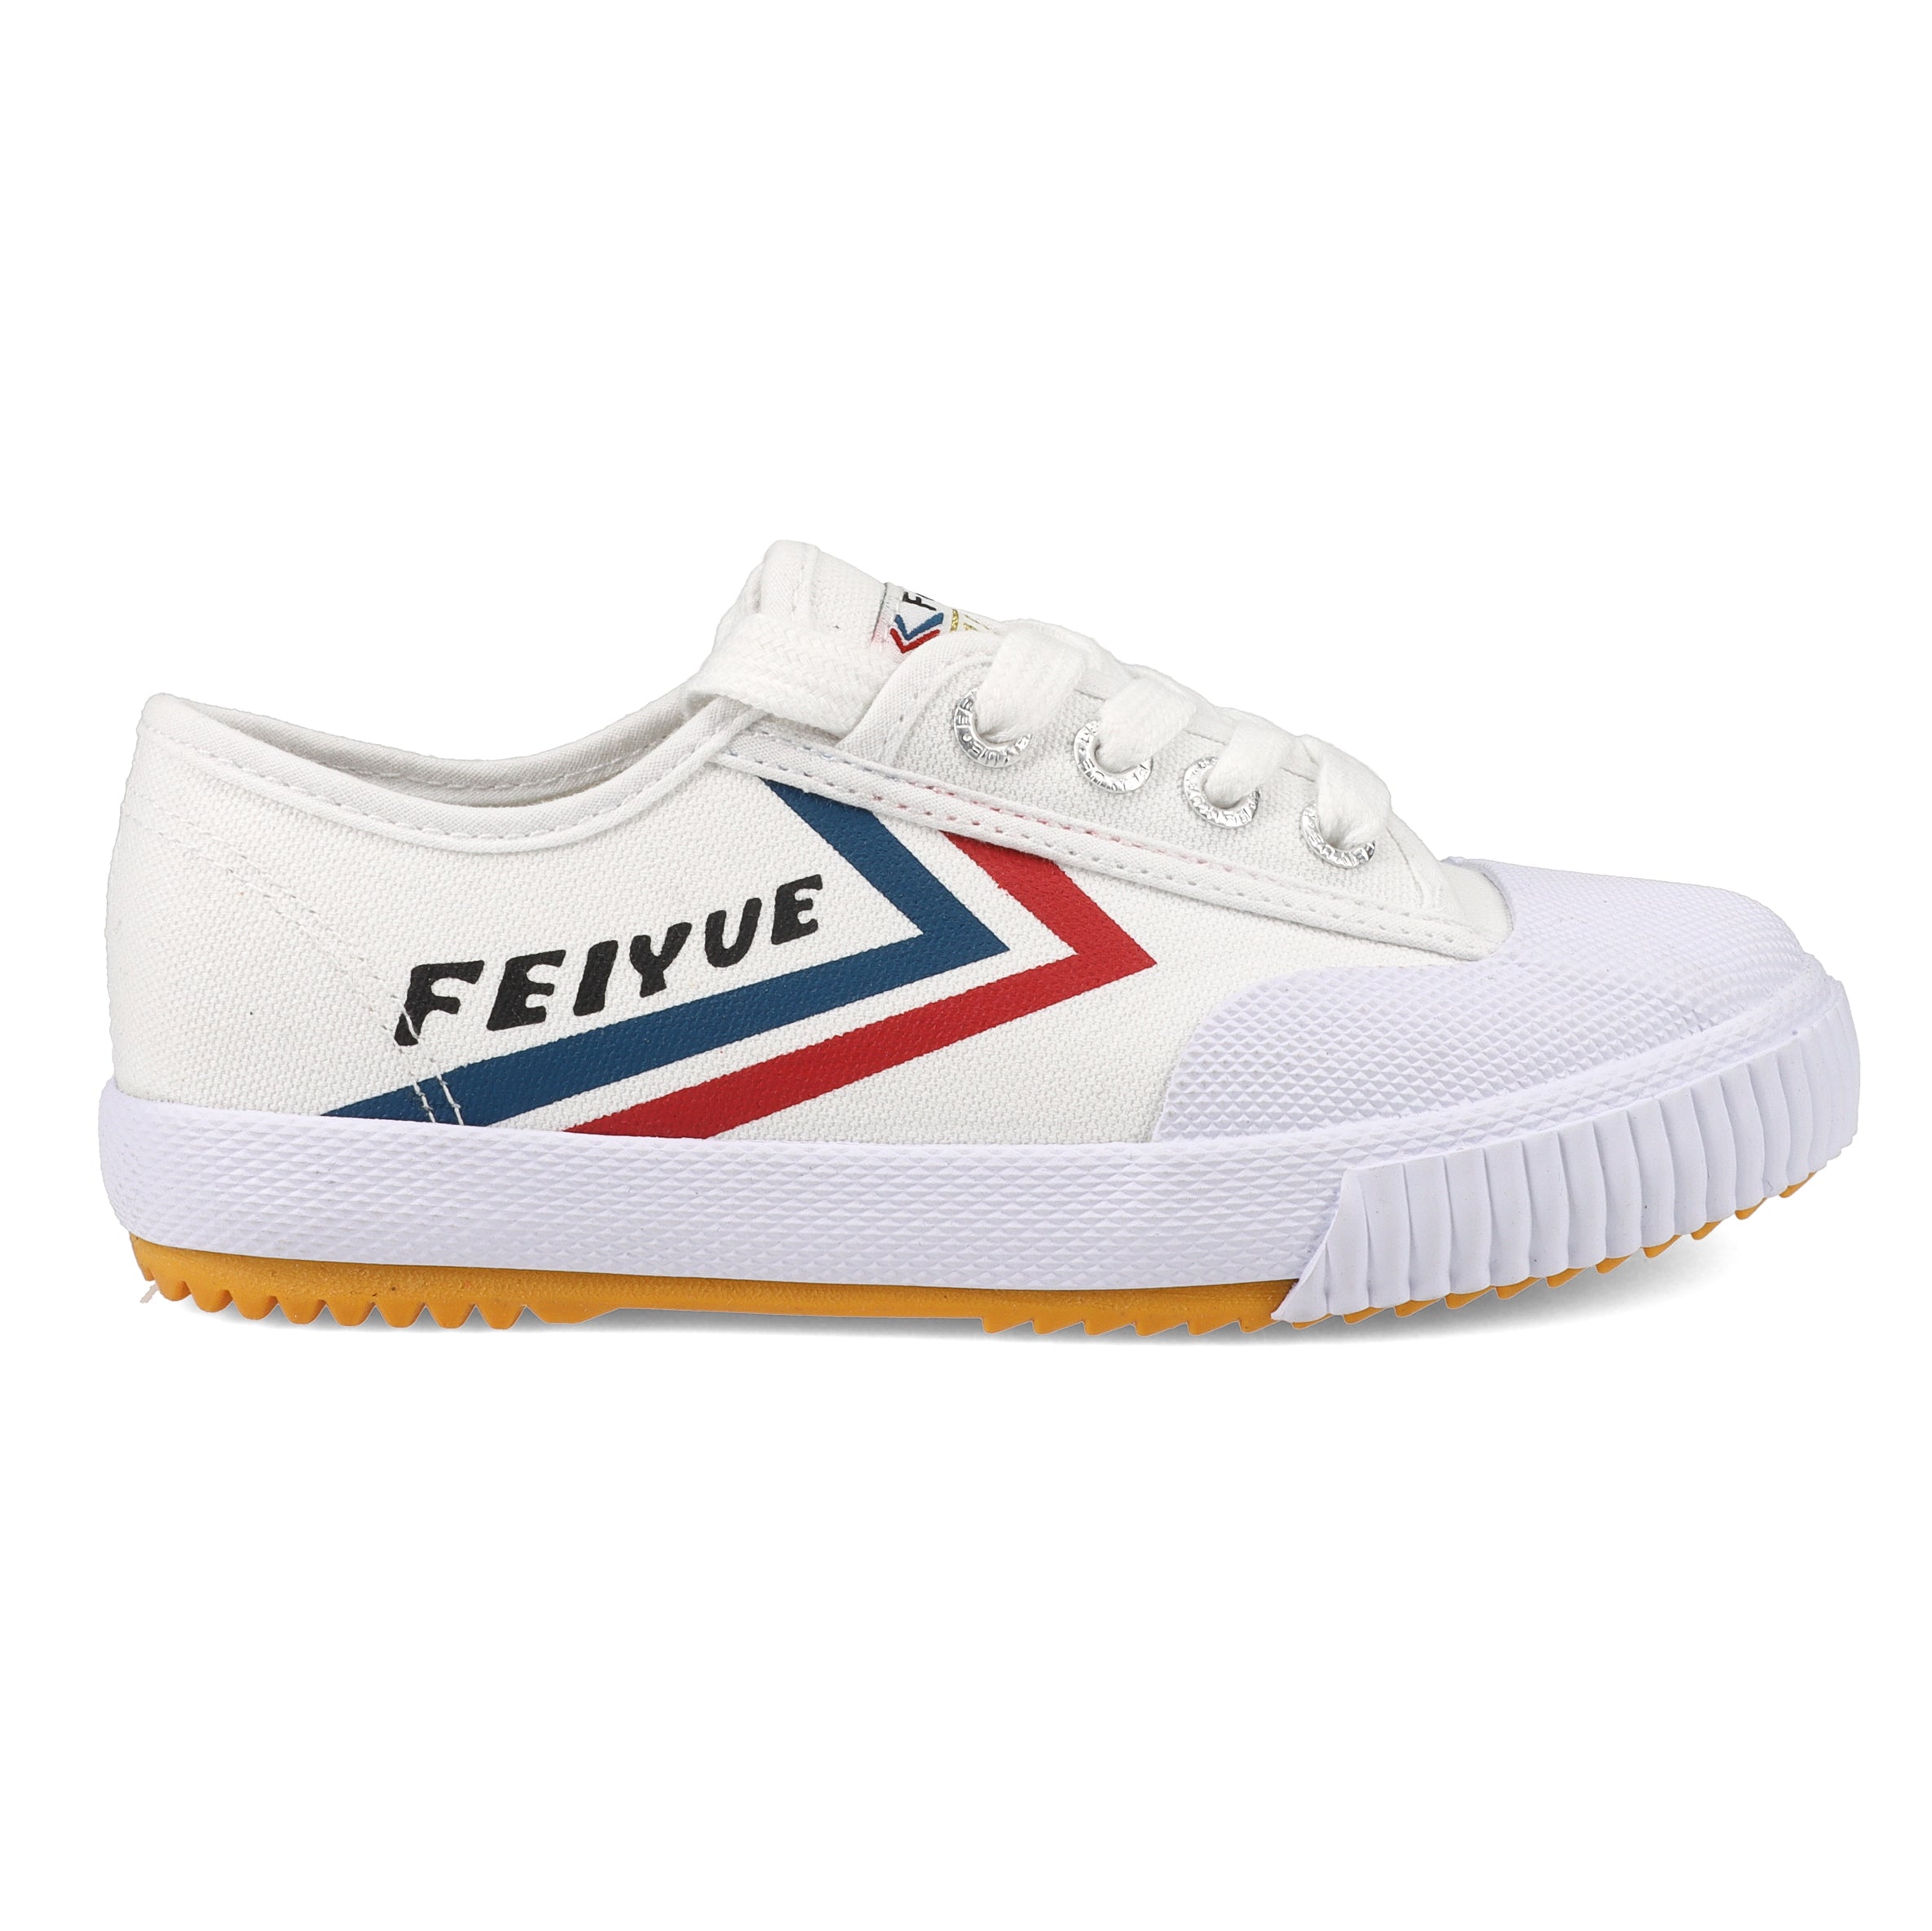 Feiyue shoes are the people's sneaker of China – Put This On